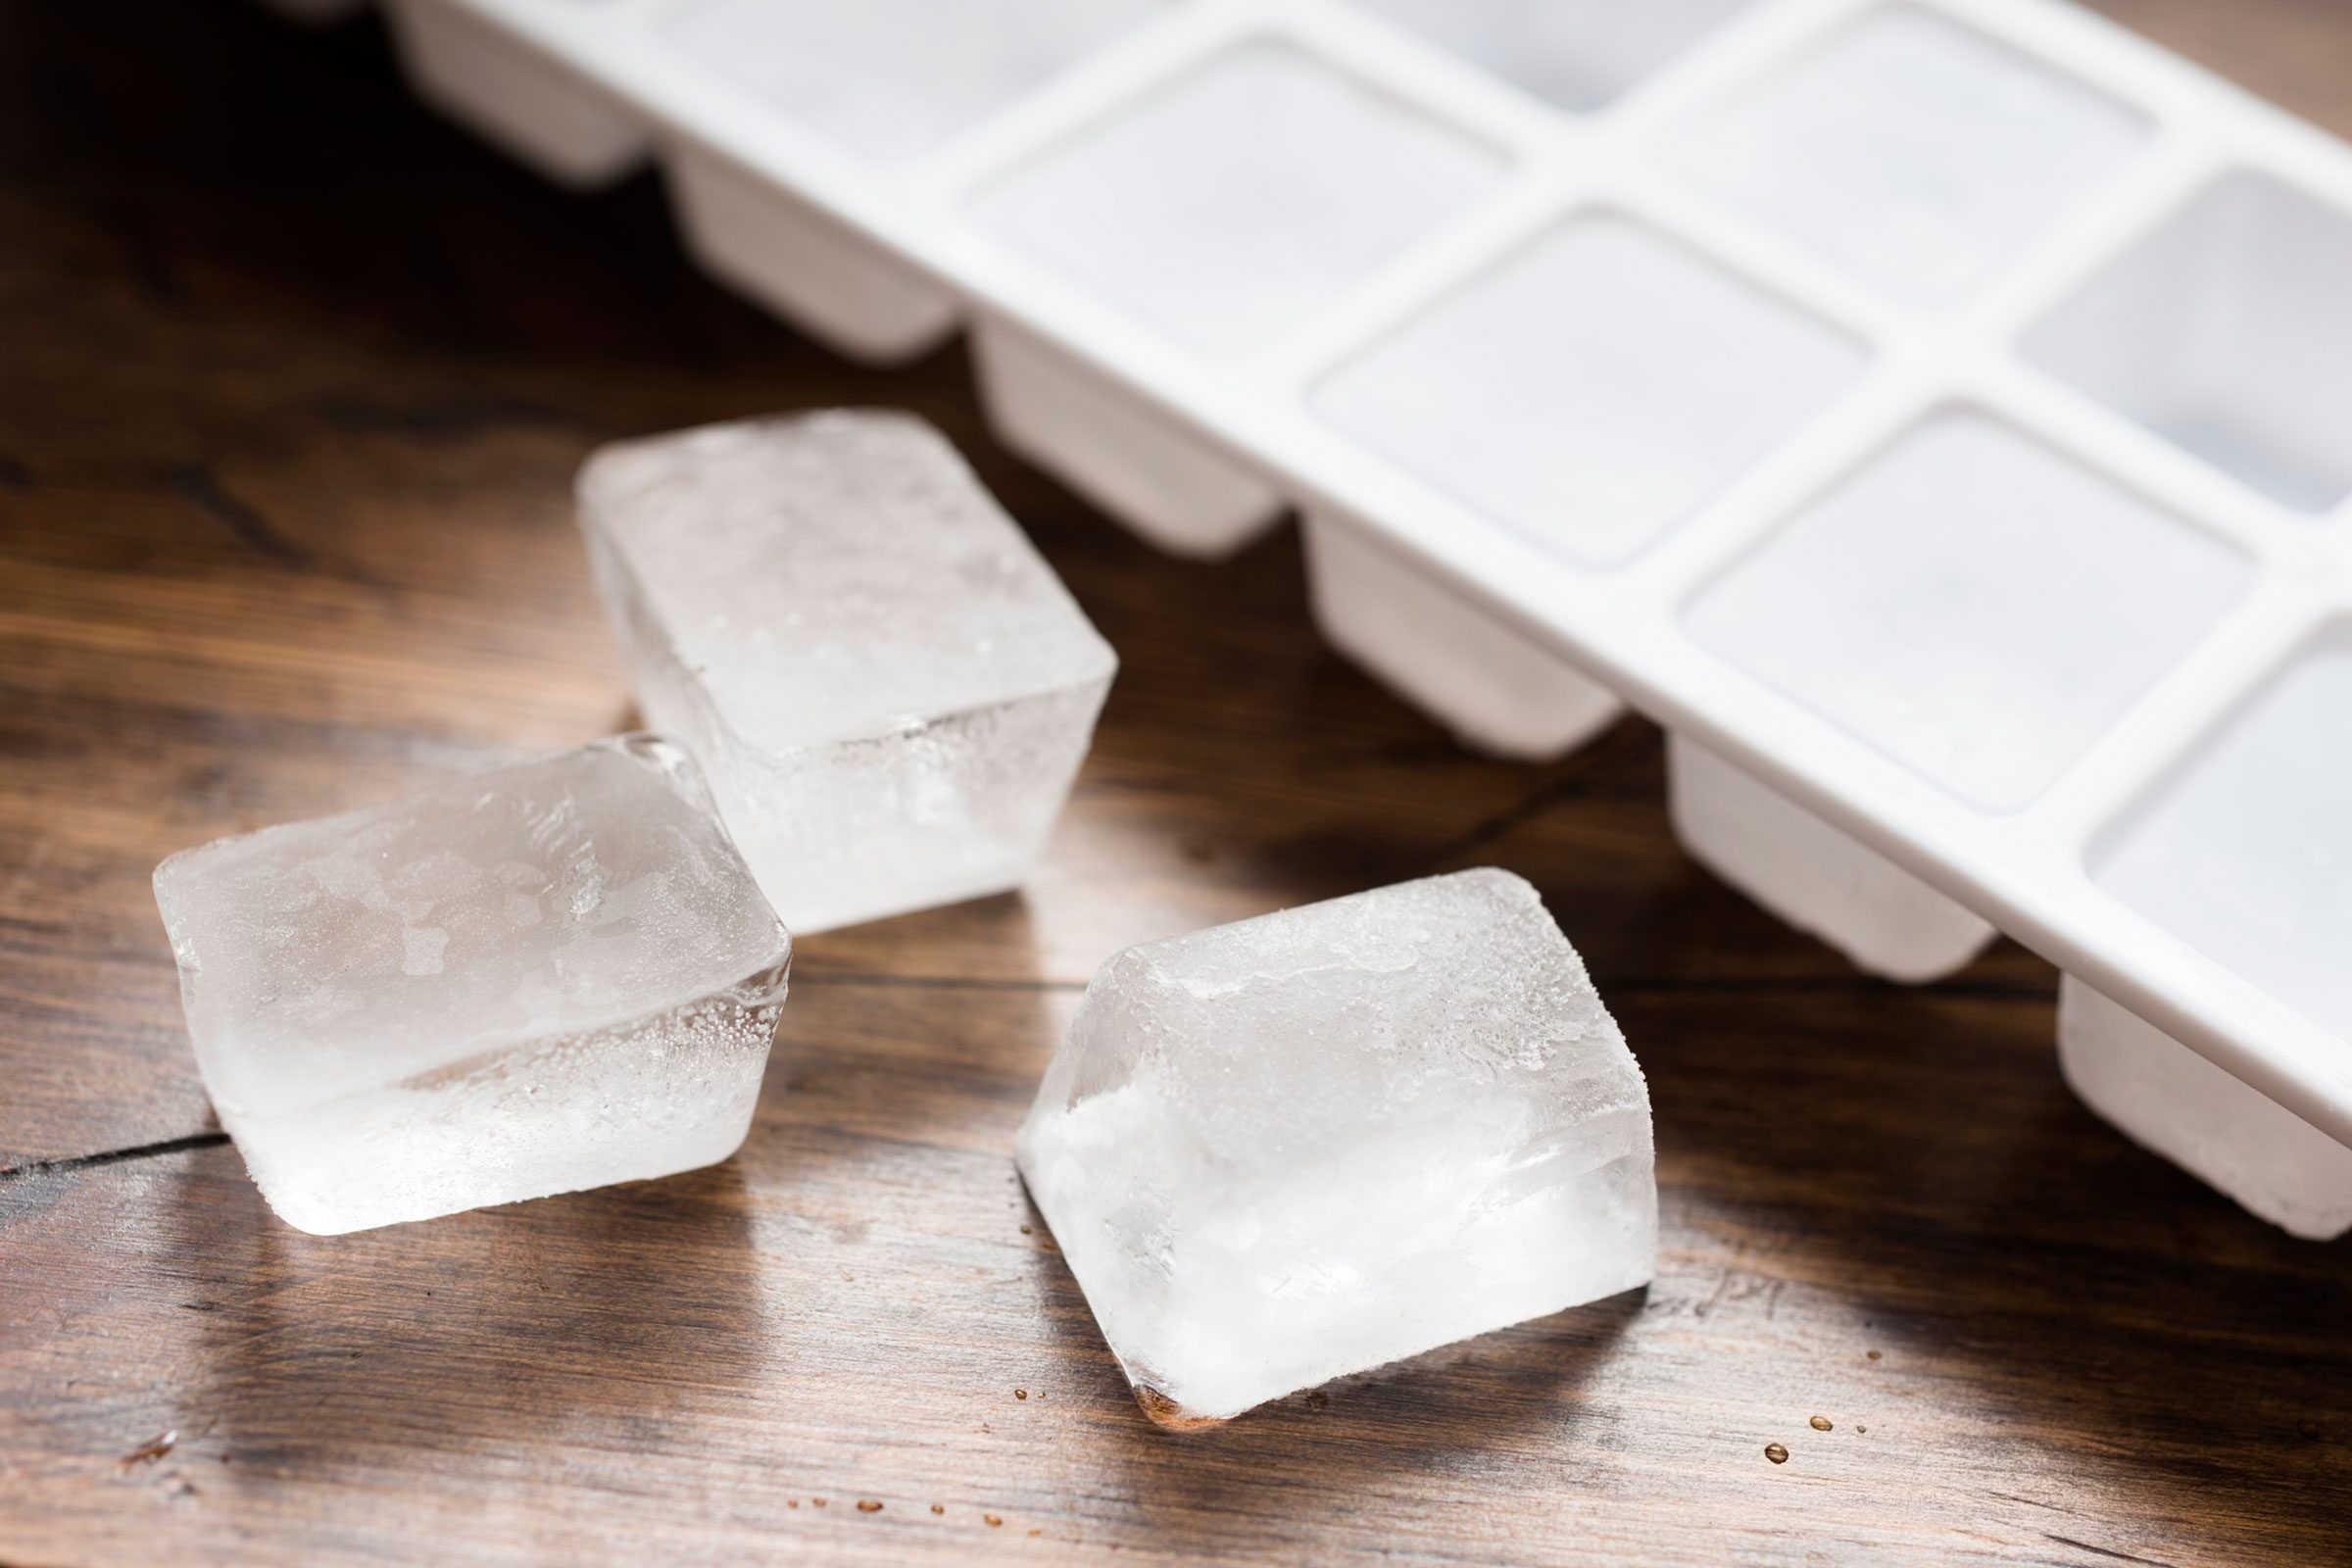 https://www.rd.com/wp-content/uploads/2016/12/this-is-right-way-ice-cube-tray-485766300-john-shepherd.jpg